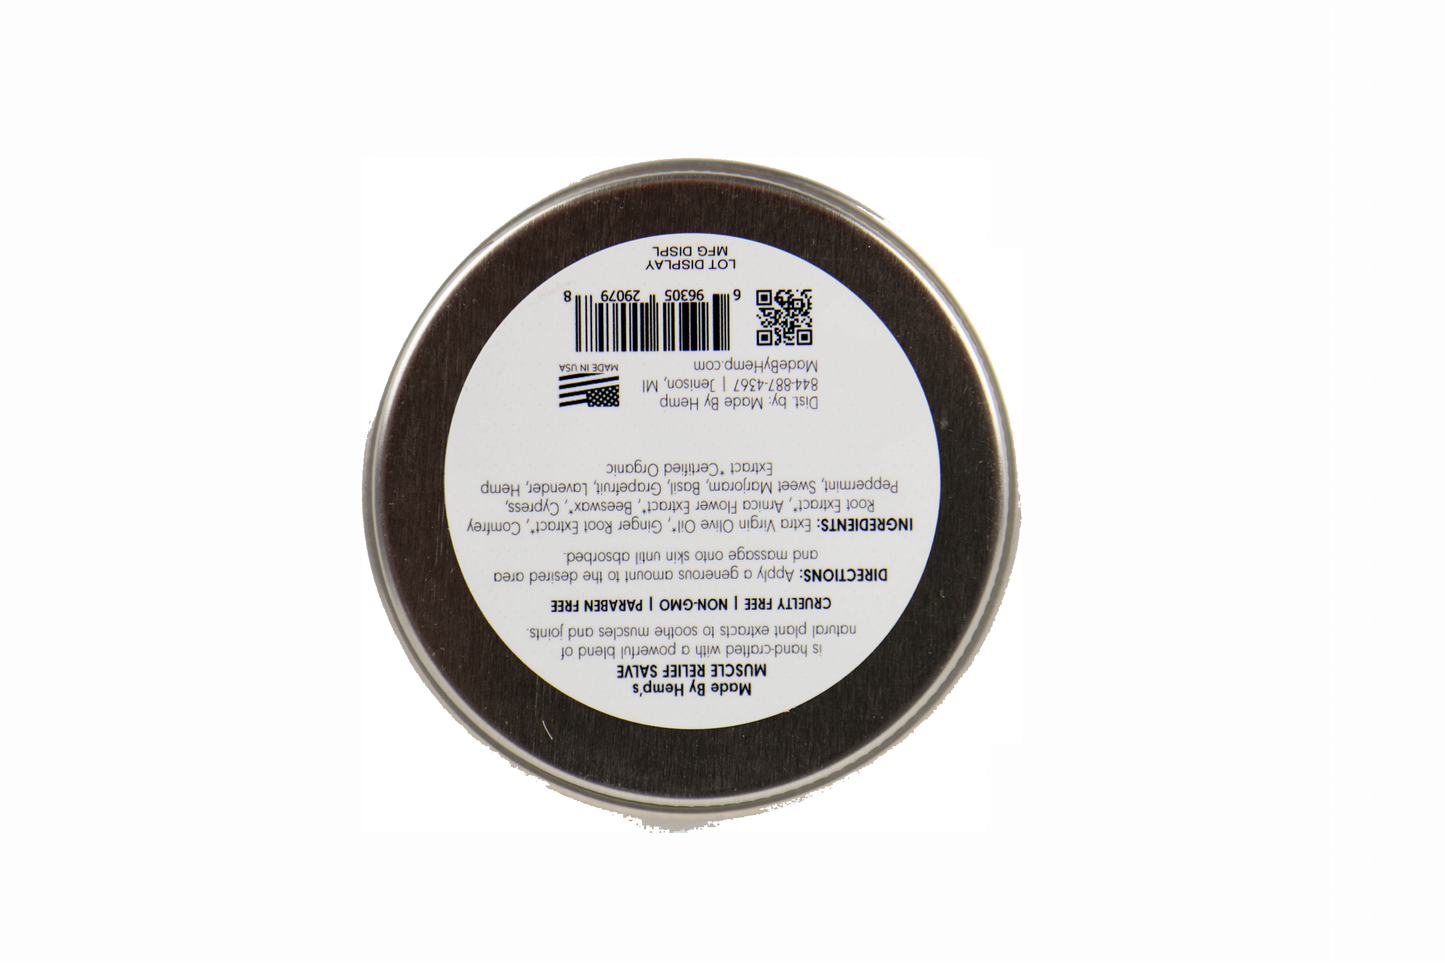 Muscle Relief Salve - Made By Hemp